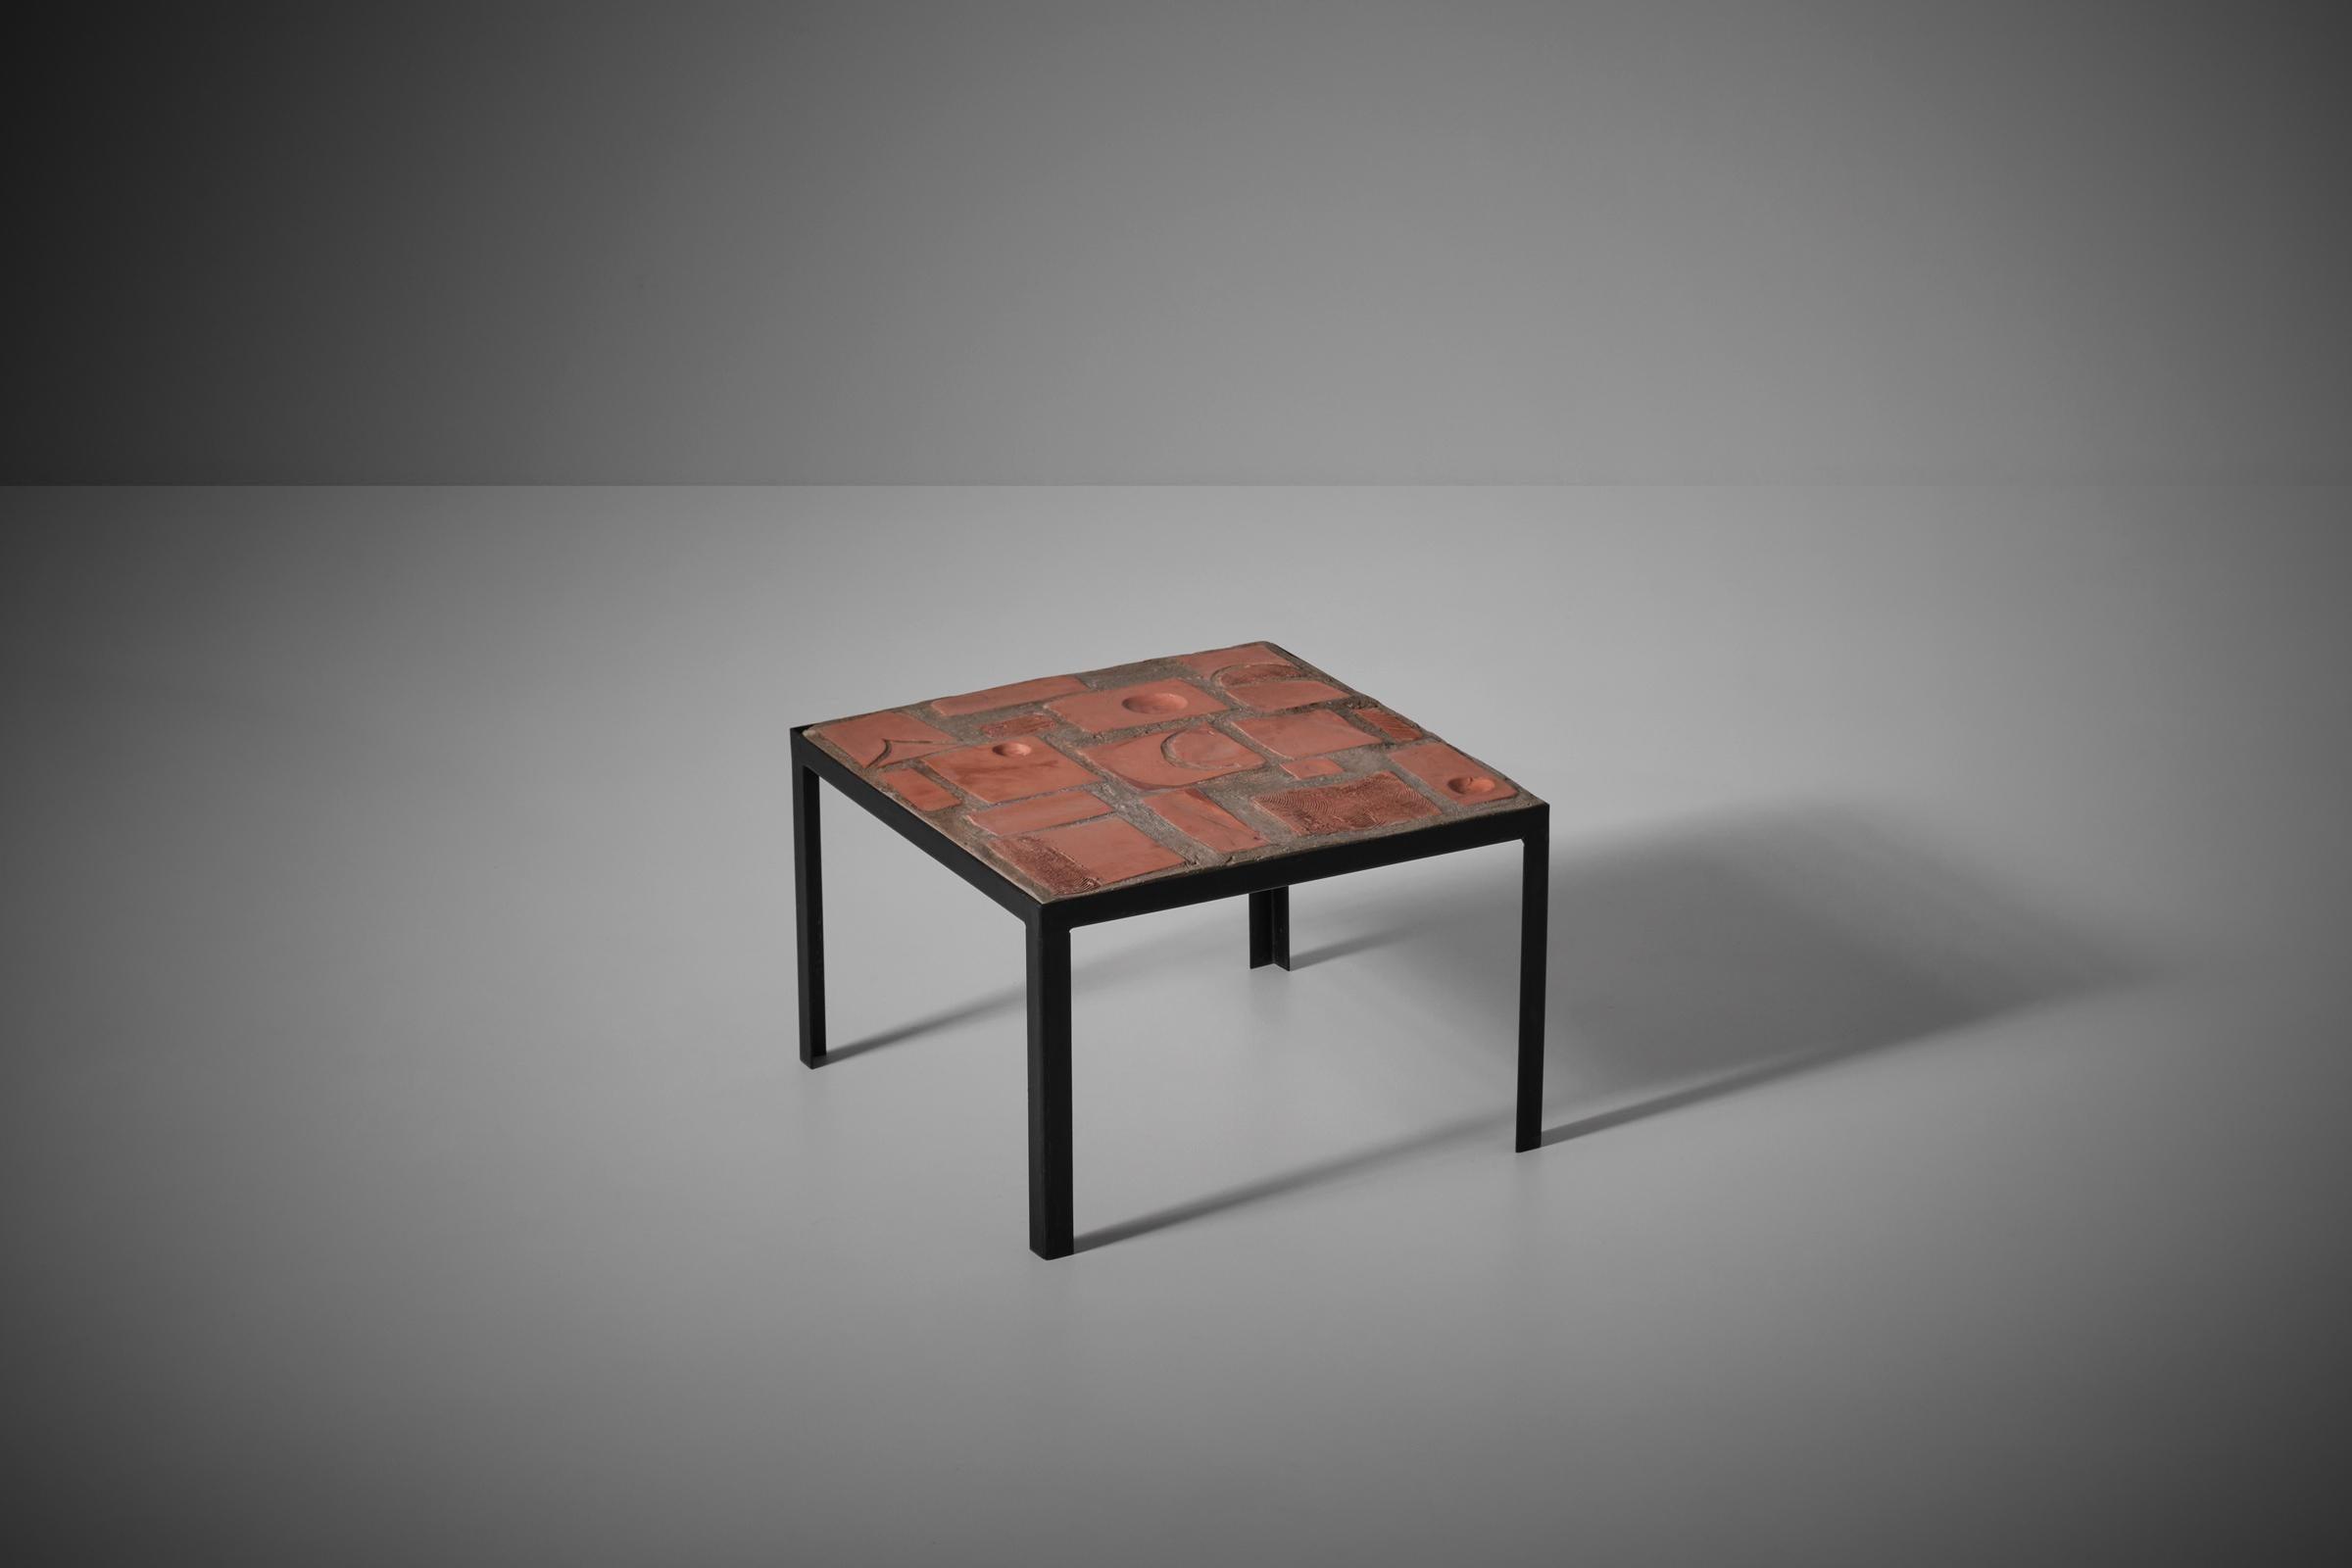 Sculptural side table by an unknown artist, France 1960s. The table displays an interesting composition of small reliefs handmade from terracotta. The terracotta tiles lie in a bed of concrete, the square top lays in a modest metal base. Very